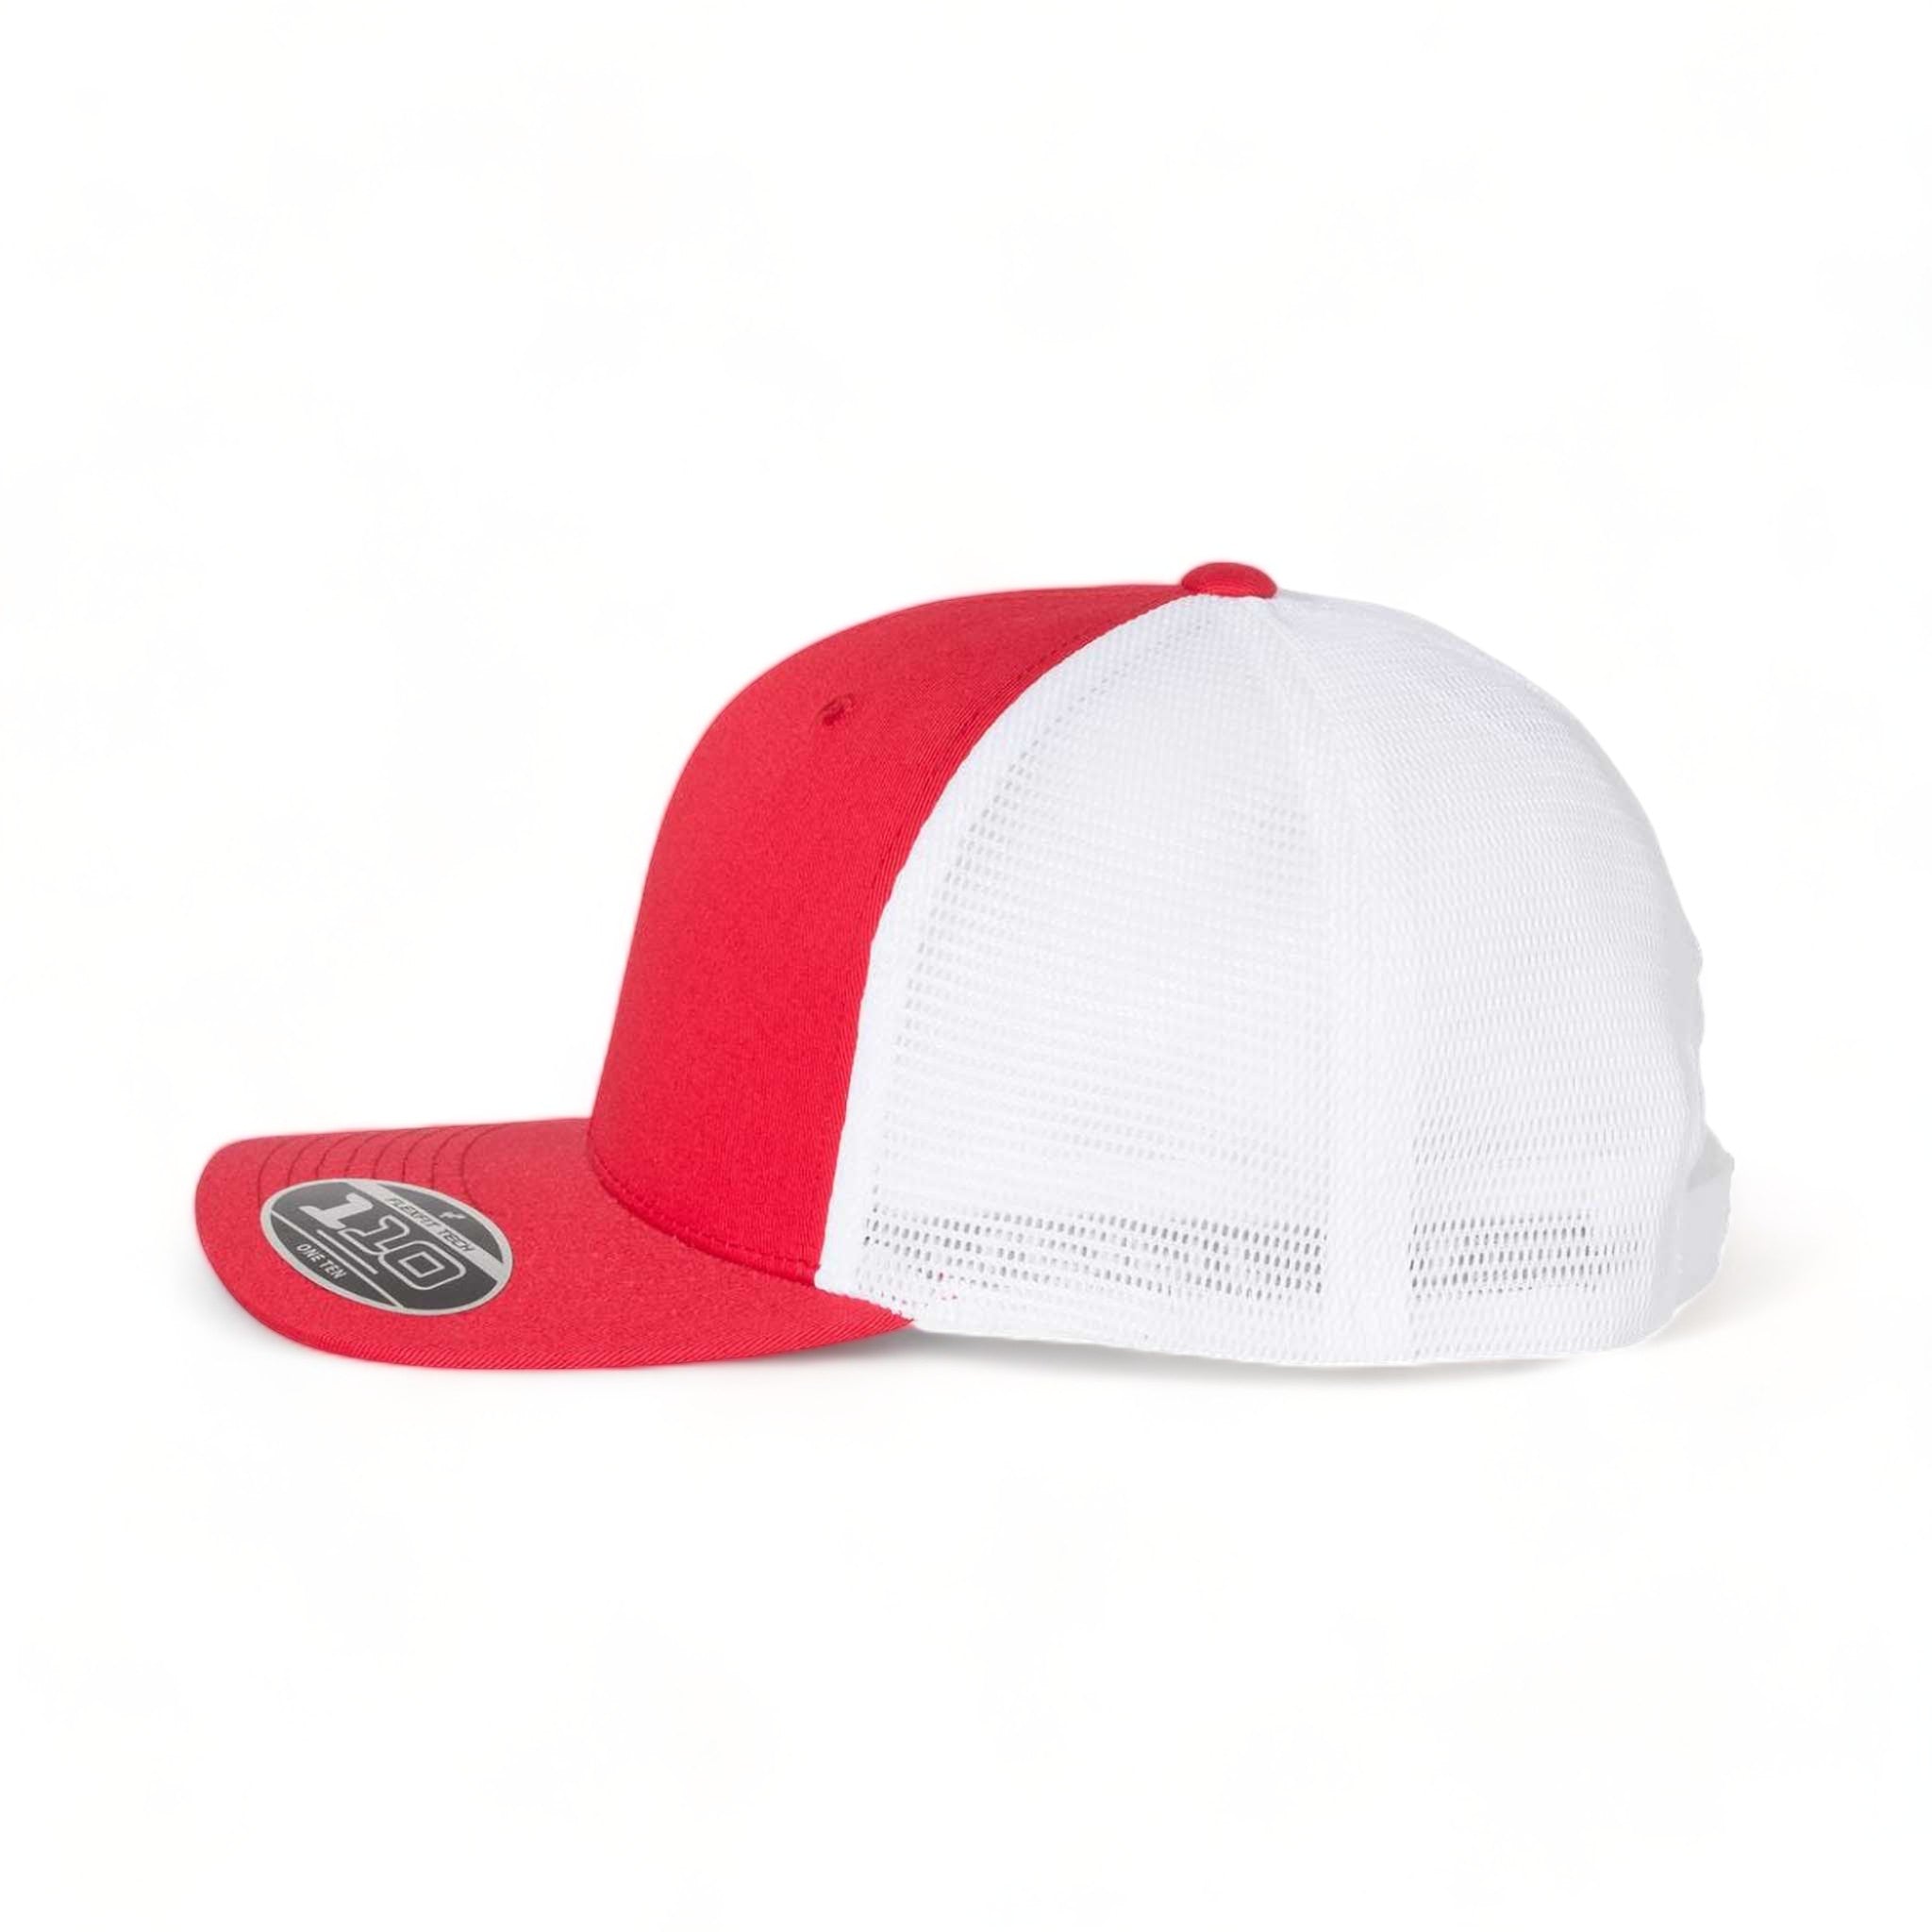 Side view of Flexfit 110M custom hat in red and white